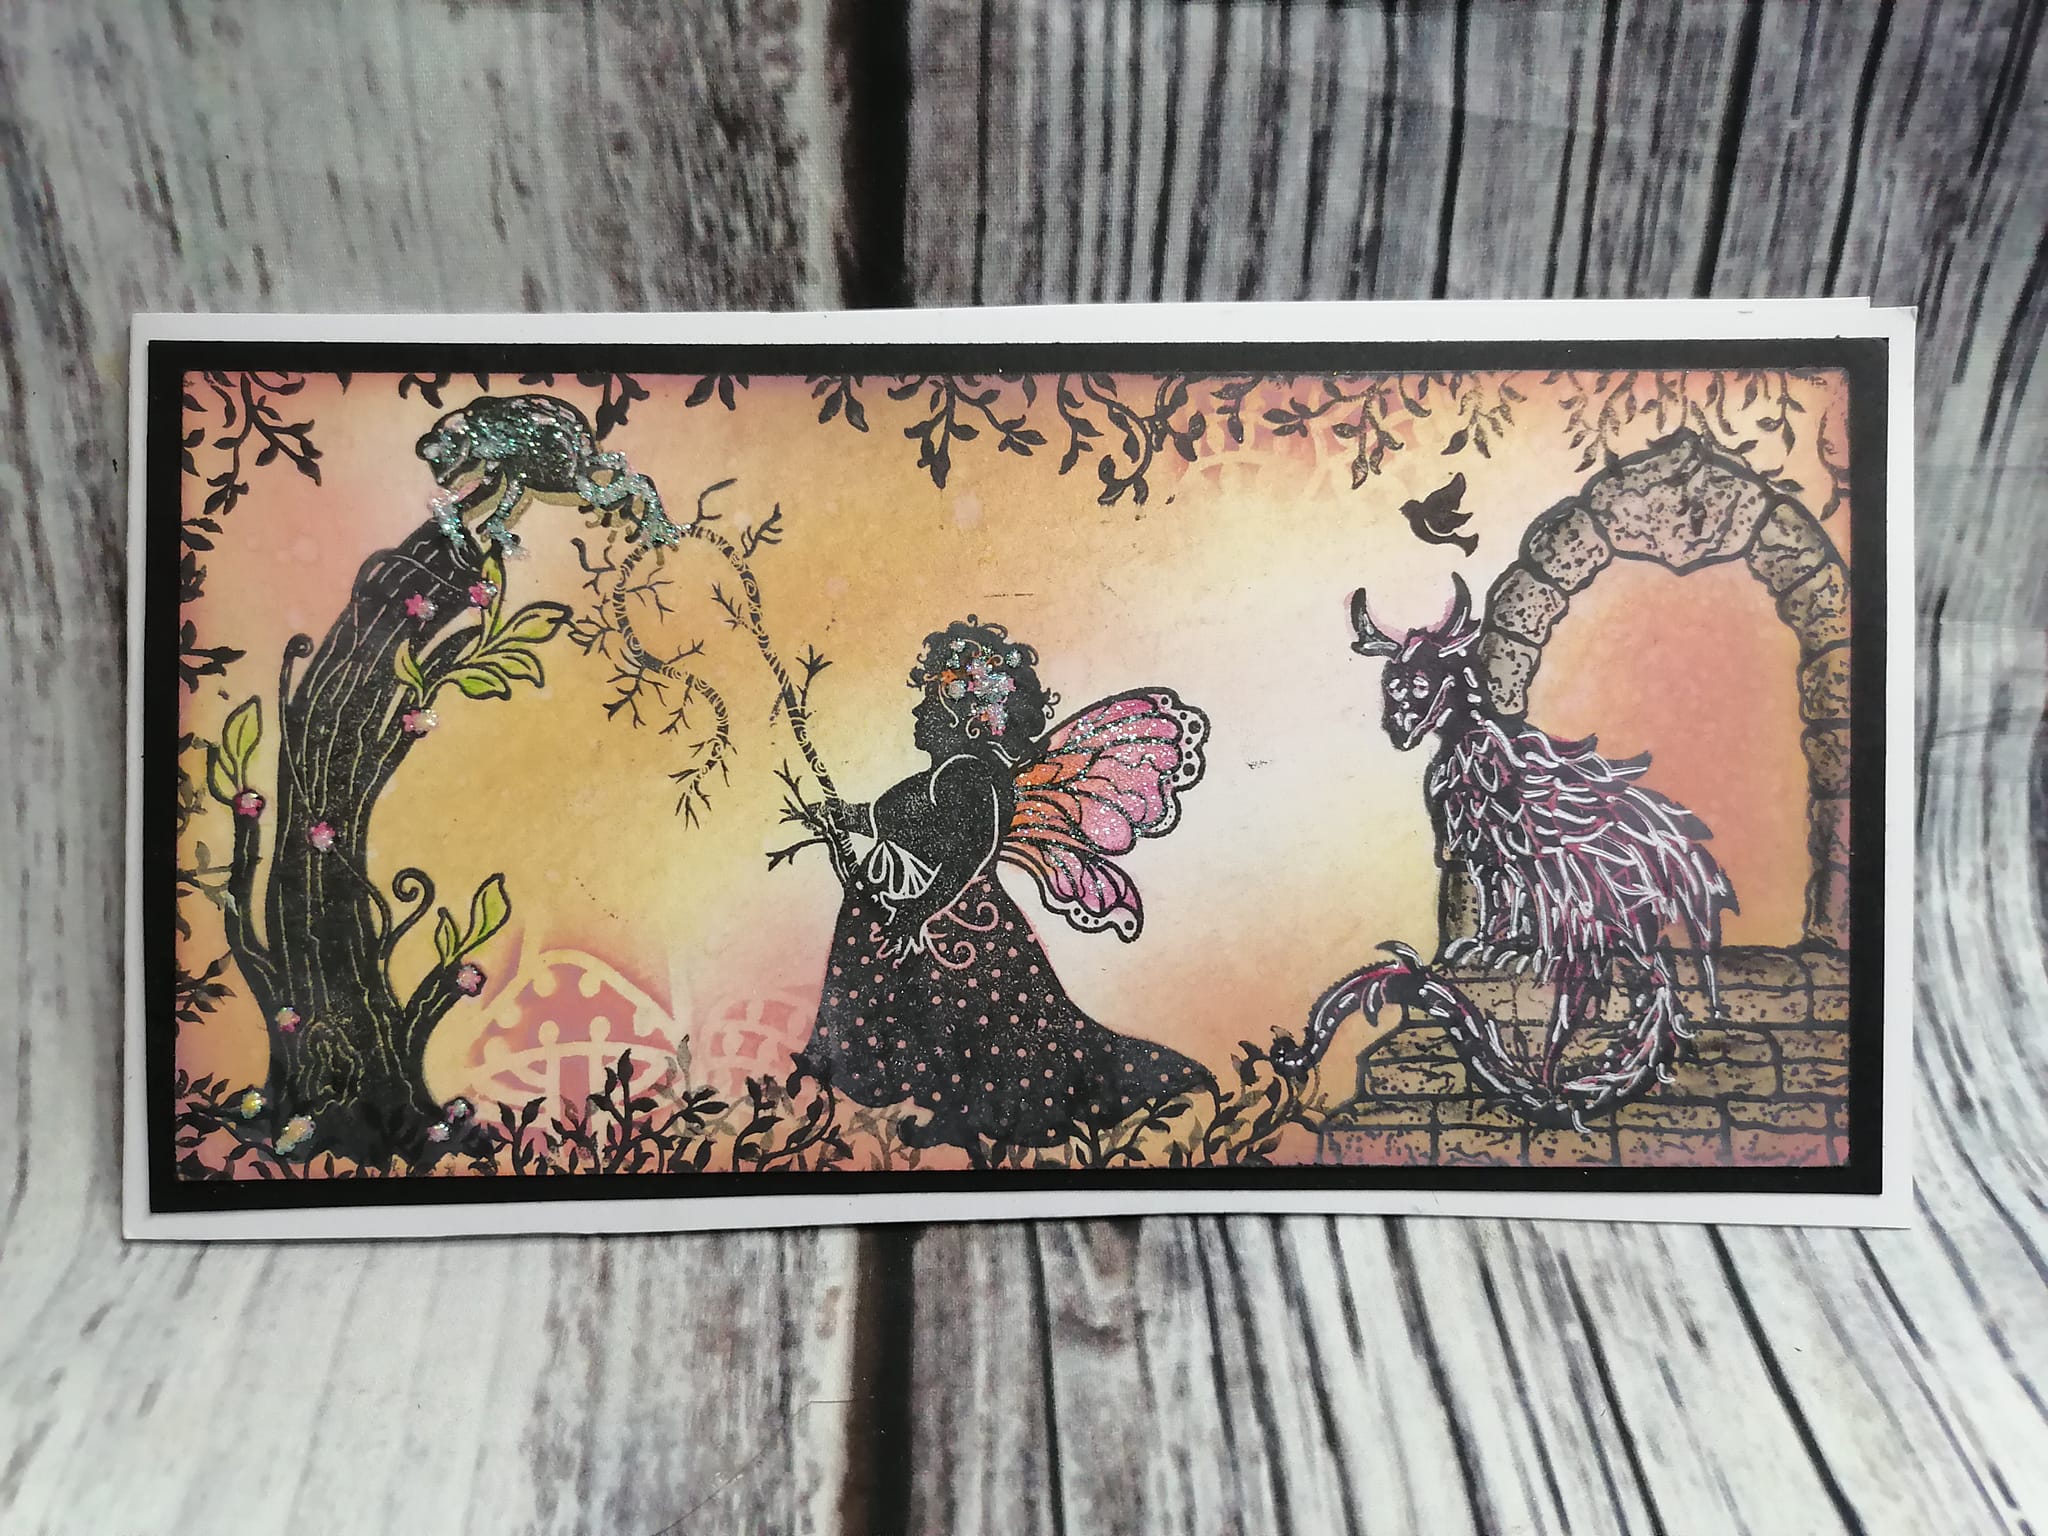 Fairy Hugs Stamps - Pandora's Archway